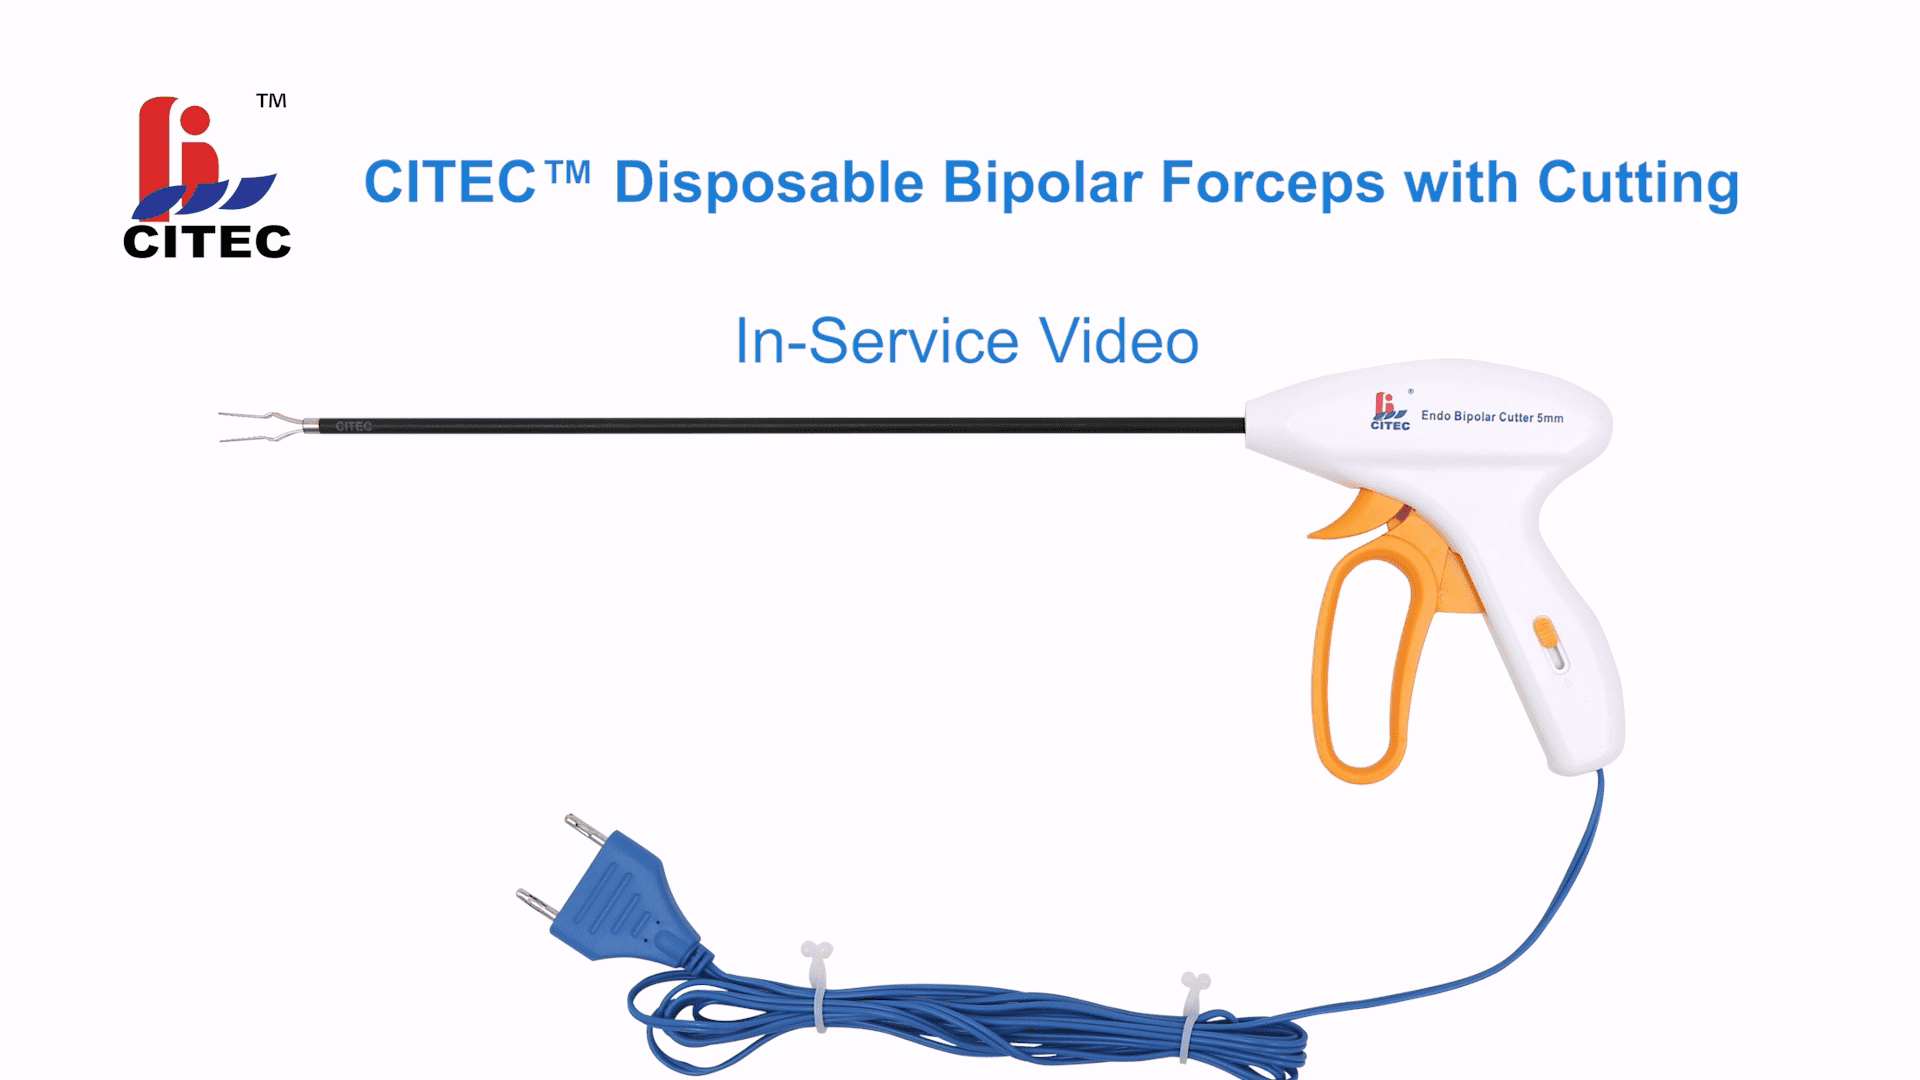 CITEC™ Disposable Bipolar Forceps with Cutting In-Service Video